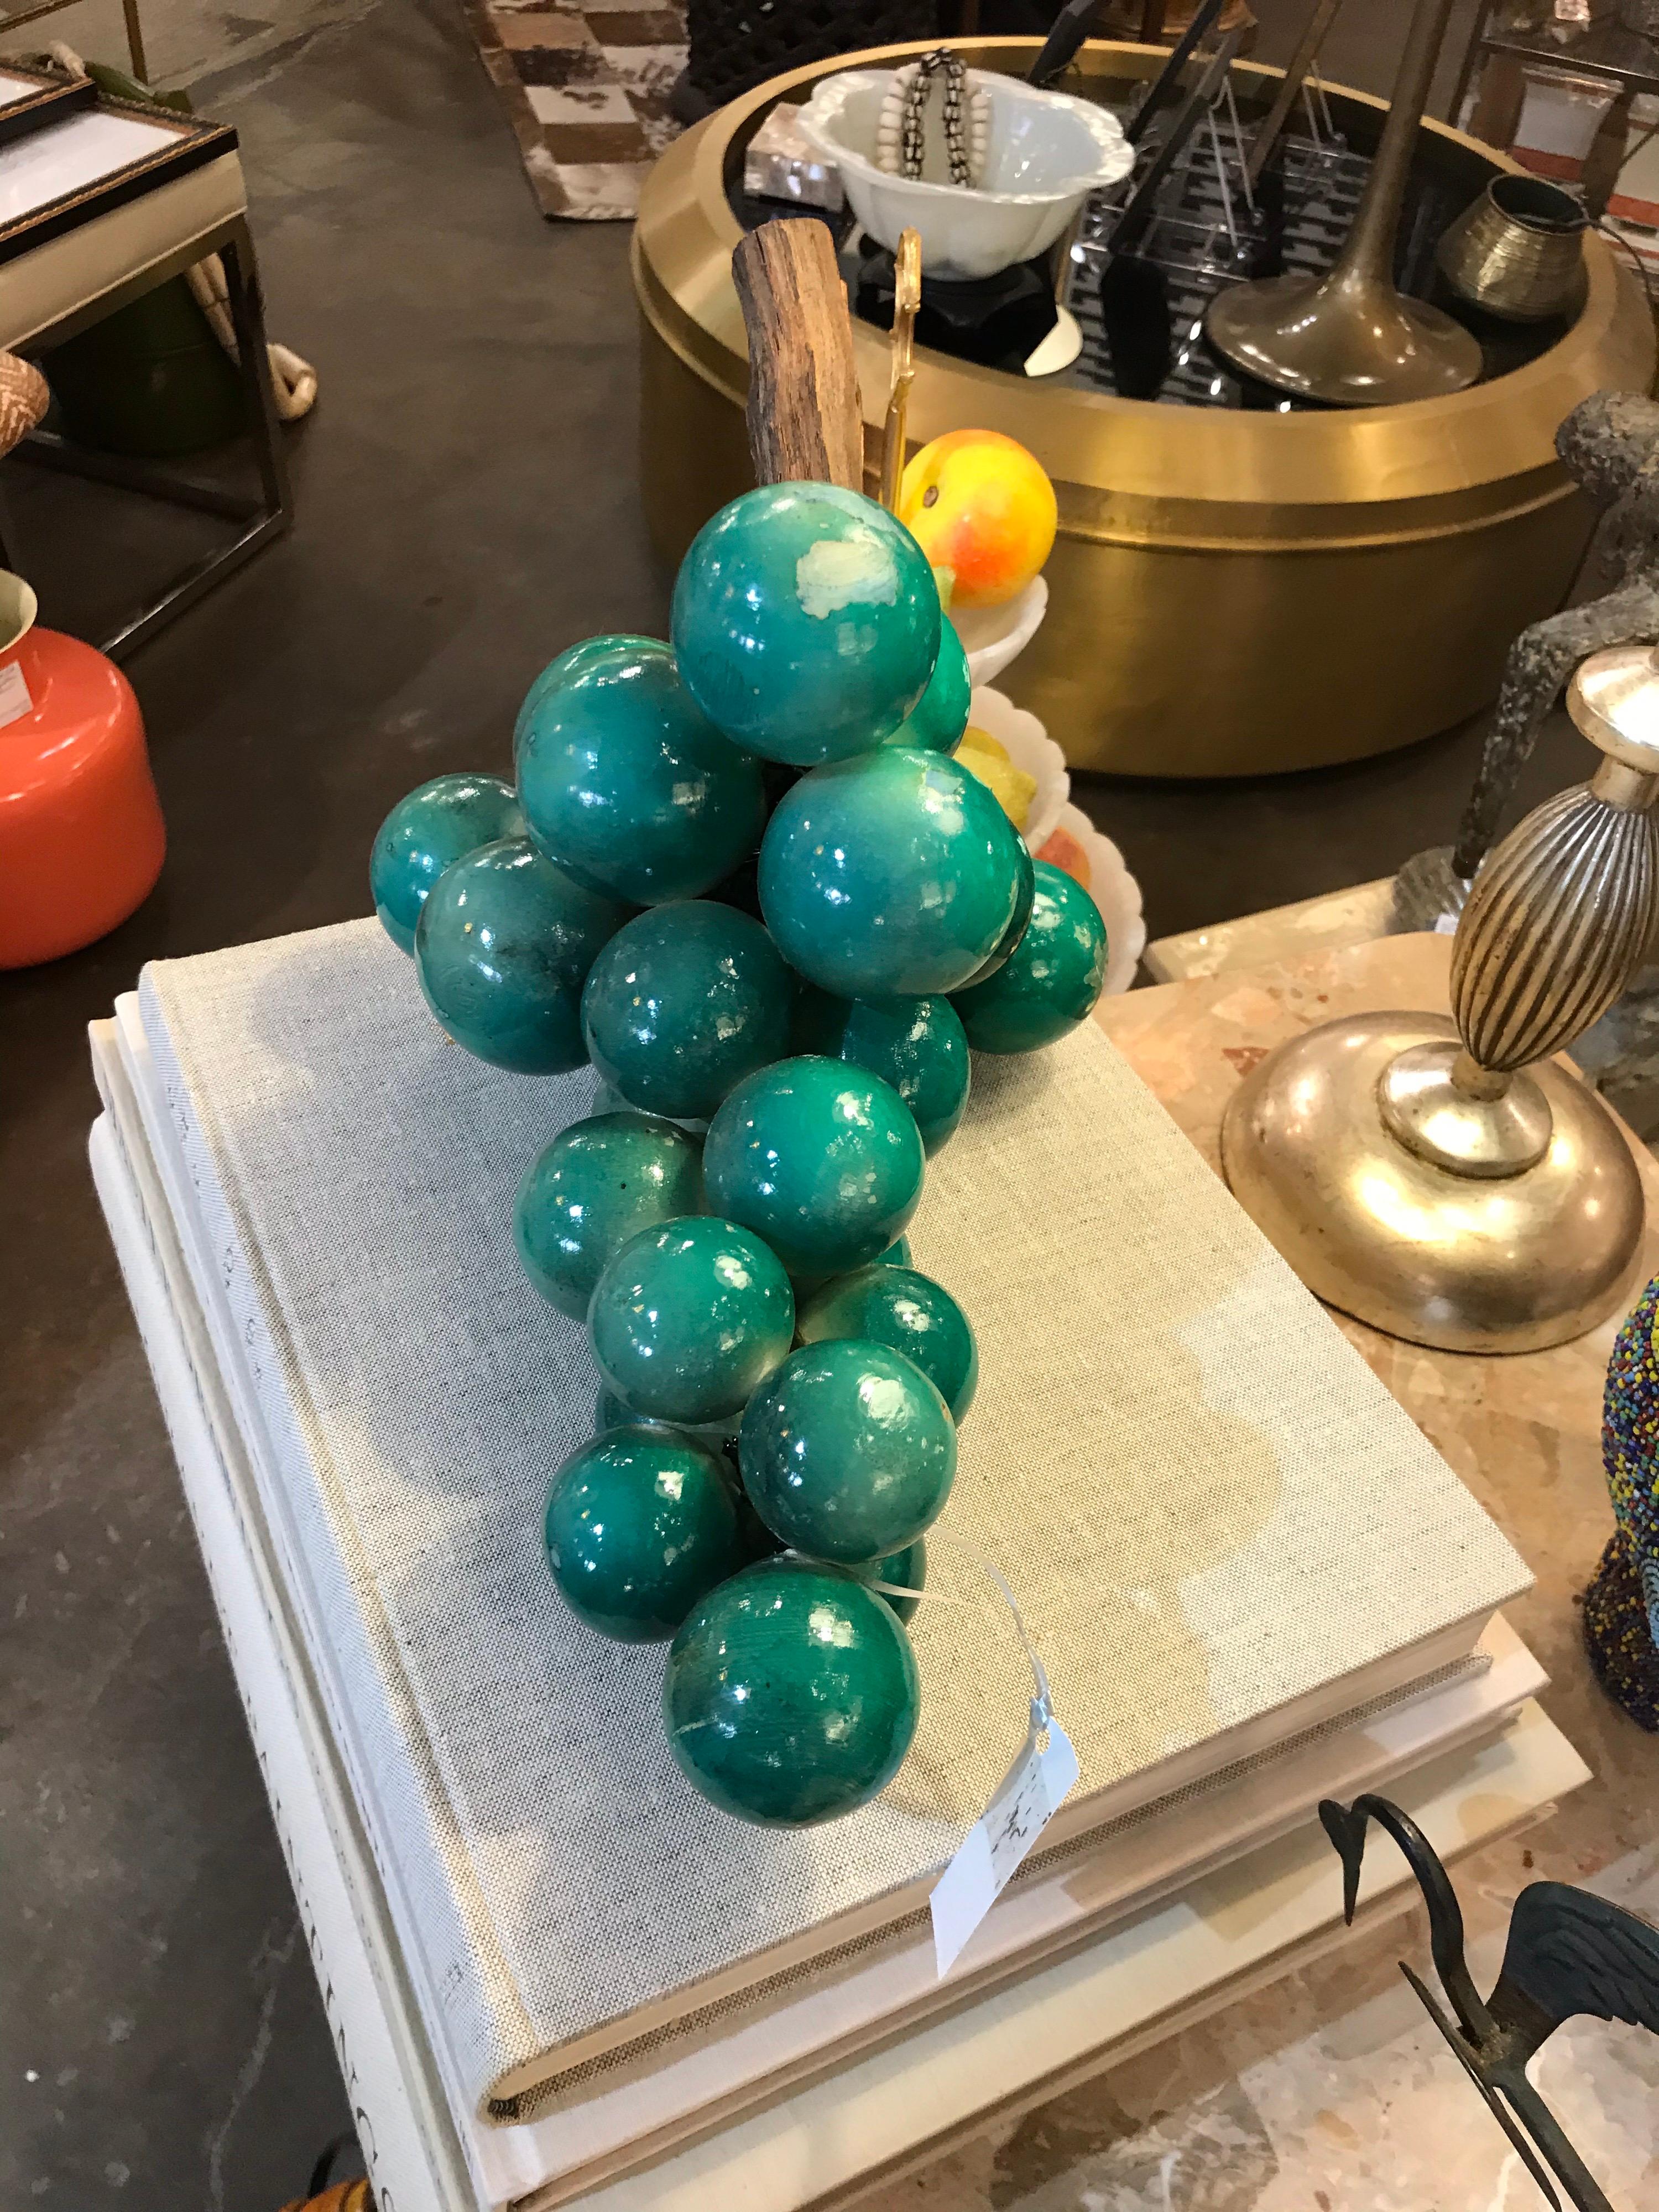 These are beautiful turquoise alabaster grapes from Italy.